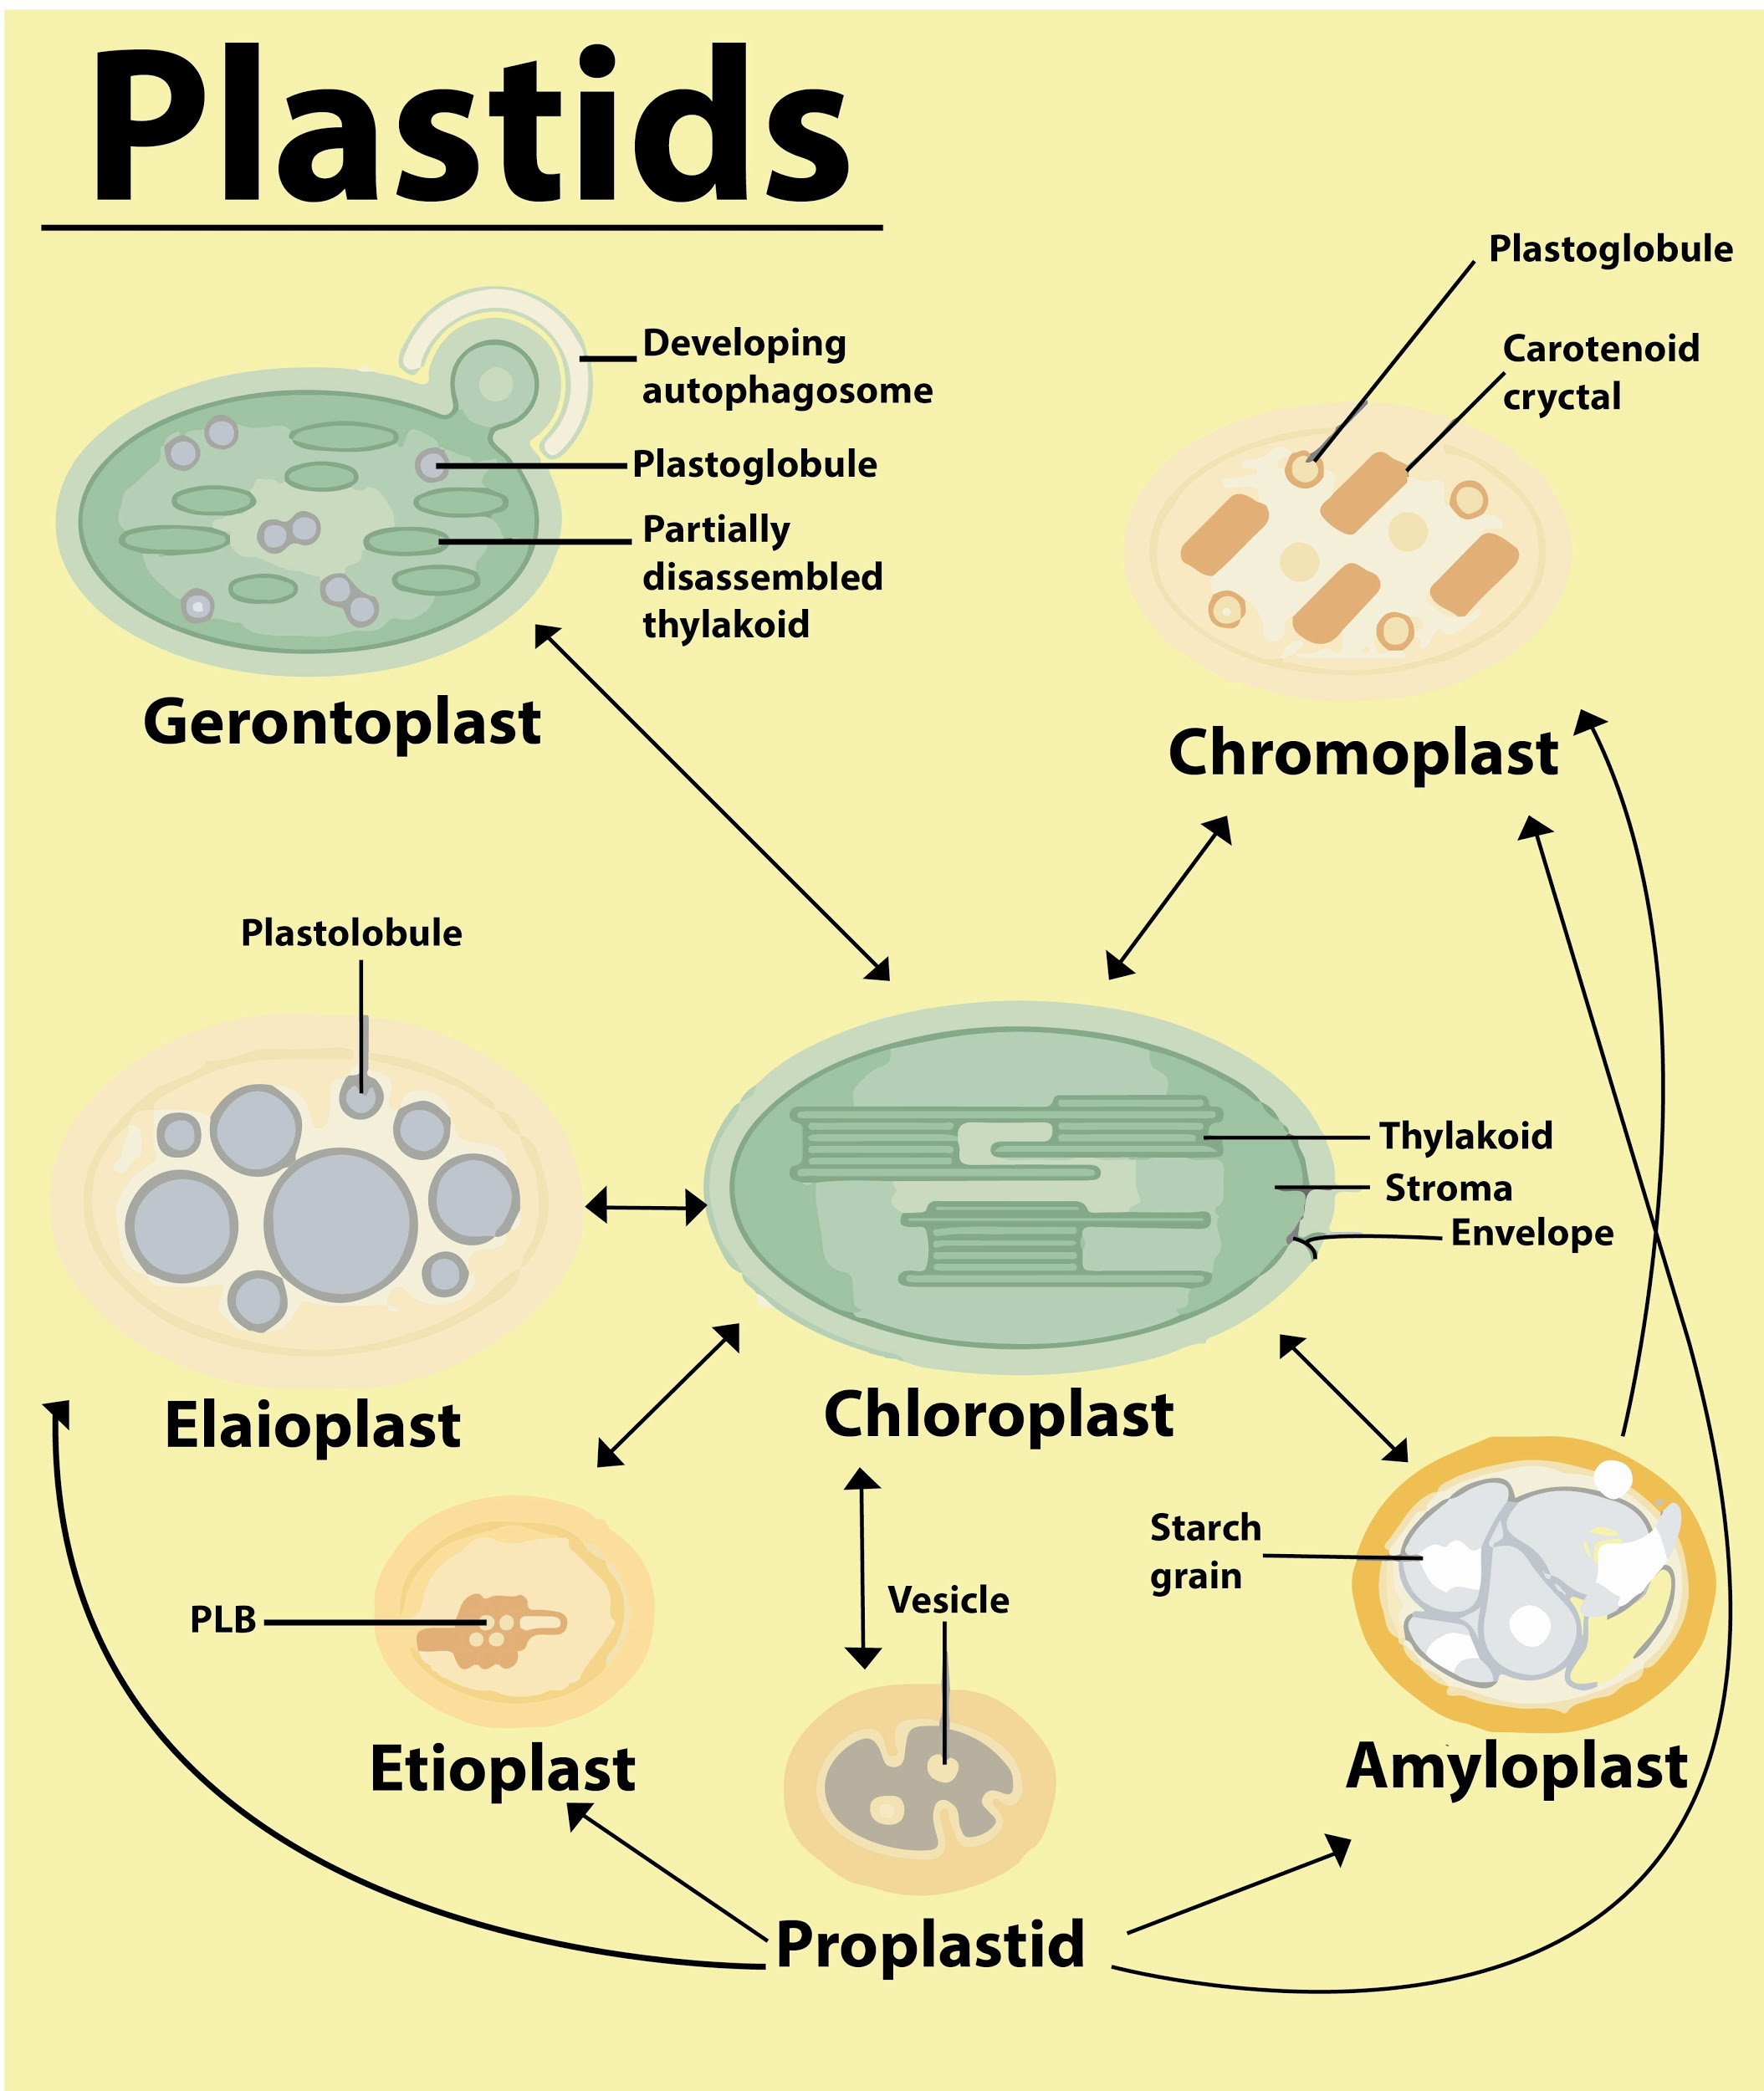 Plastids are found in(a)All animal cells(b)Some animals(c)All plant cells(d)All  plant cells and euglenoids